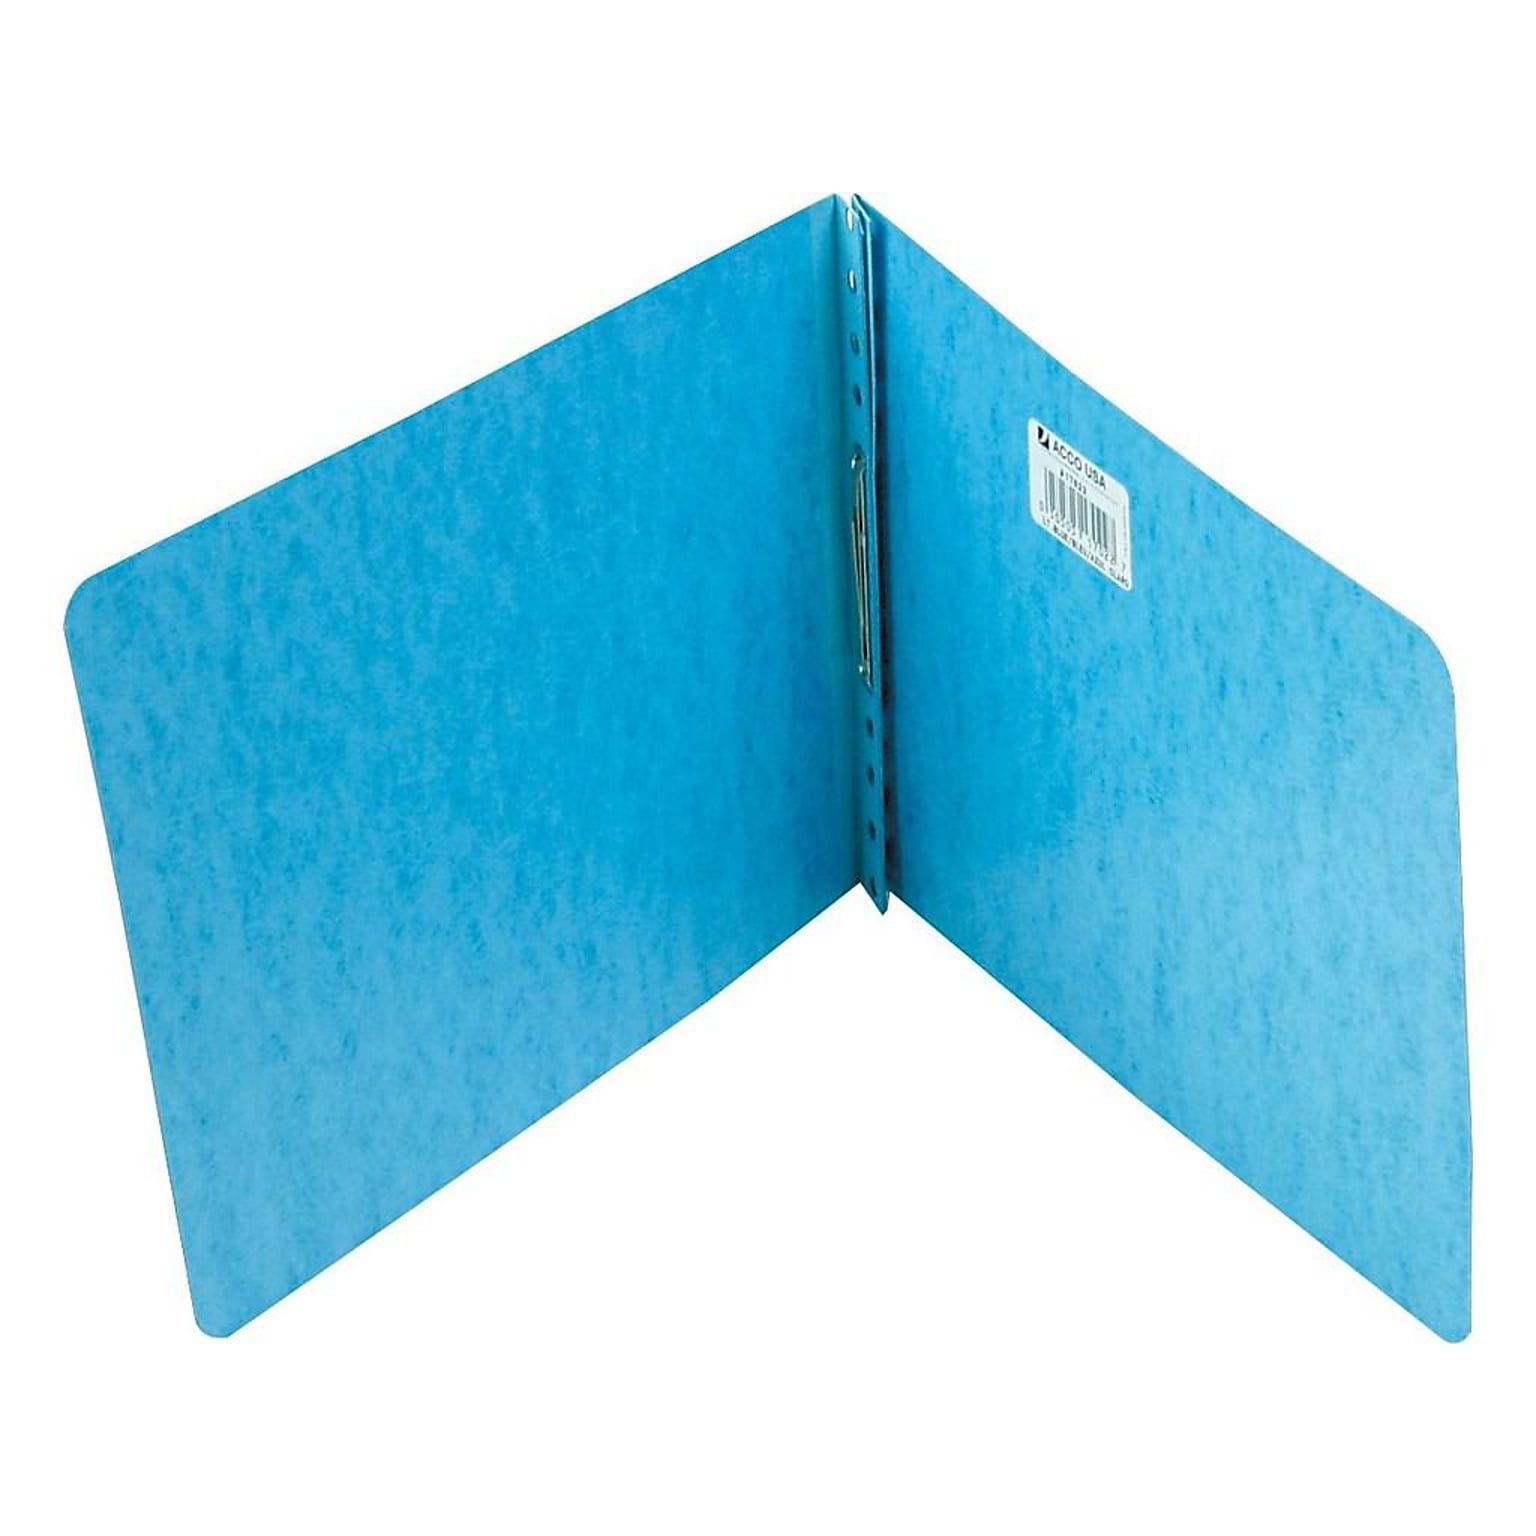 ACCO PRESSTEX 2-Prong Report Cover, Letter, Light Blue (A7017022)